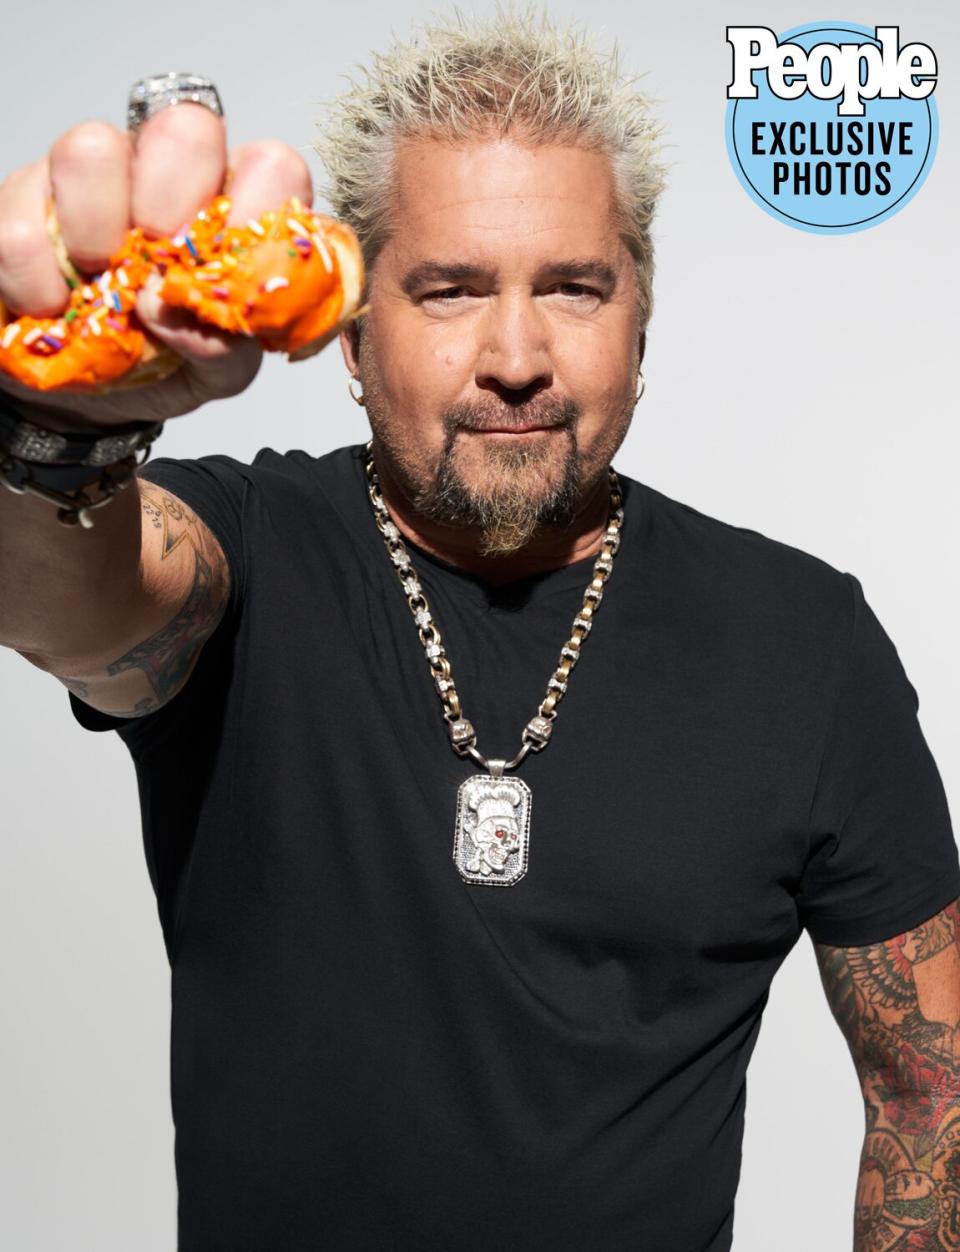 Guy Fieri photographed exclusively for People at Smashbox Studios in Culver City, CA, on 8/29/22. Photographer: Matthew Salacuse Groomer: Adriana Sanchez-Macarty  Stylist: Jessica Vohs On-Set Stylist: Heidi Meek/The Wall Group